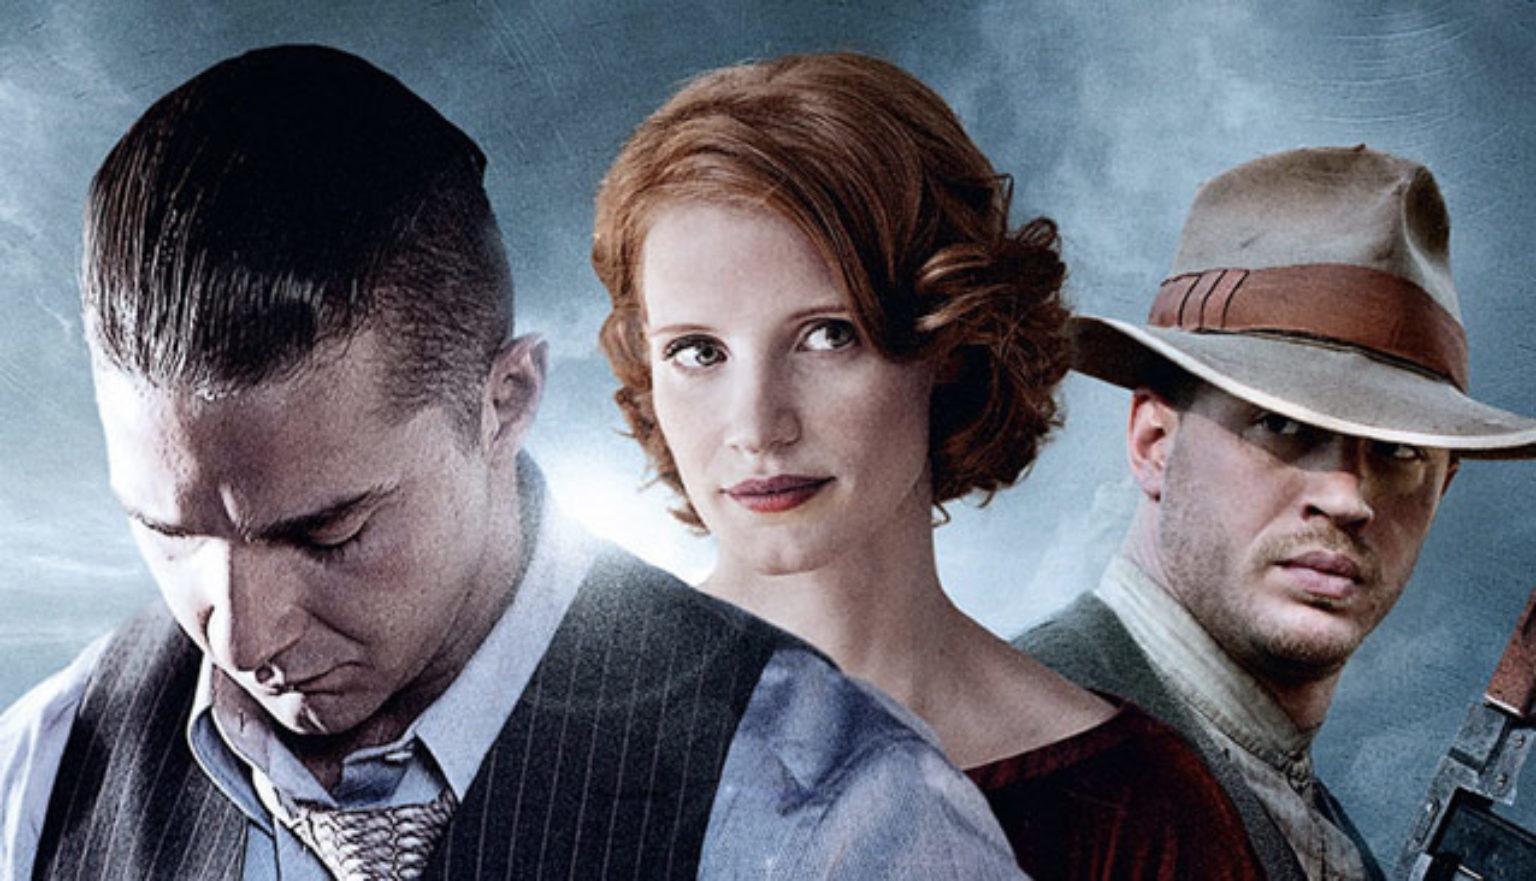 lawless 2012 movie review